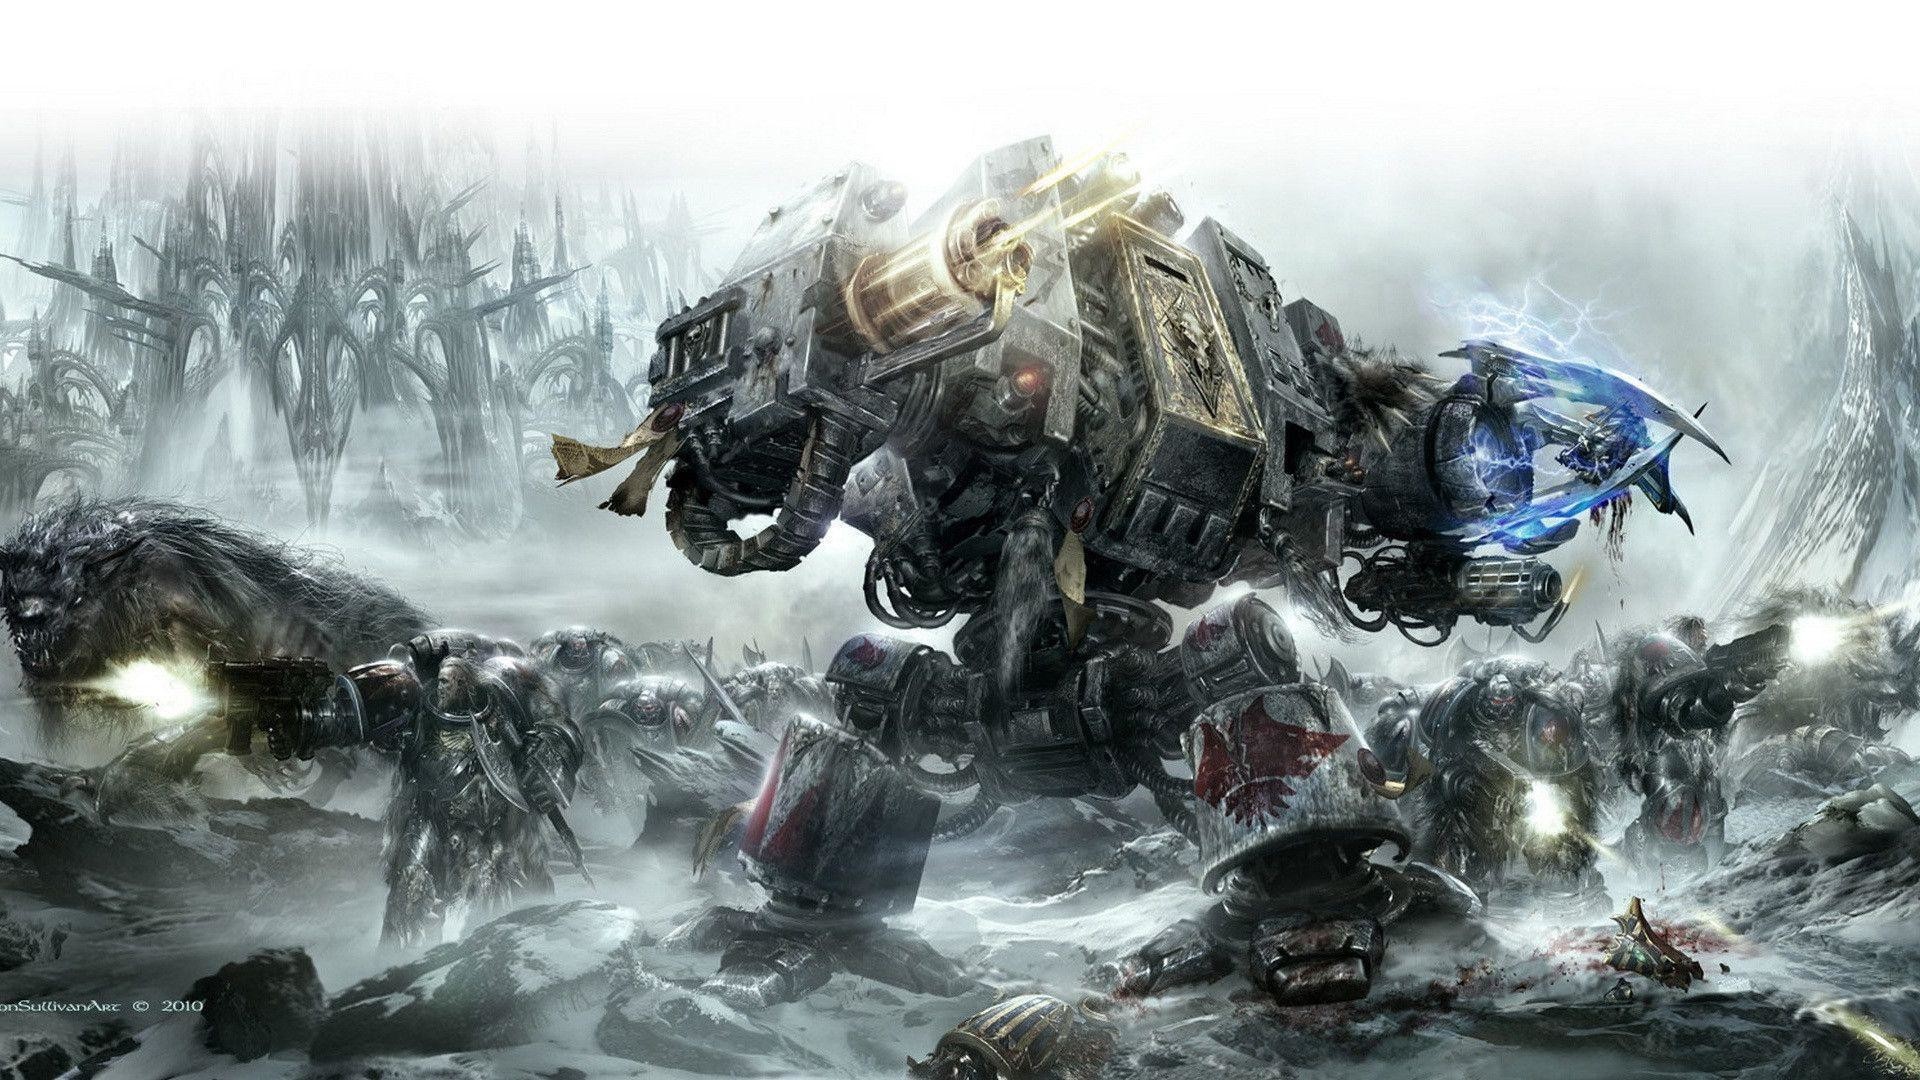 1920x1080 Wallpapers And Other Space Marine Related Art. | Warhammer 40,000 .